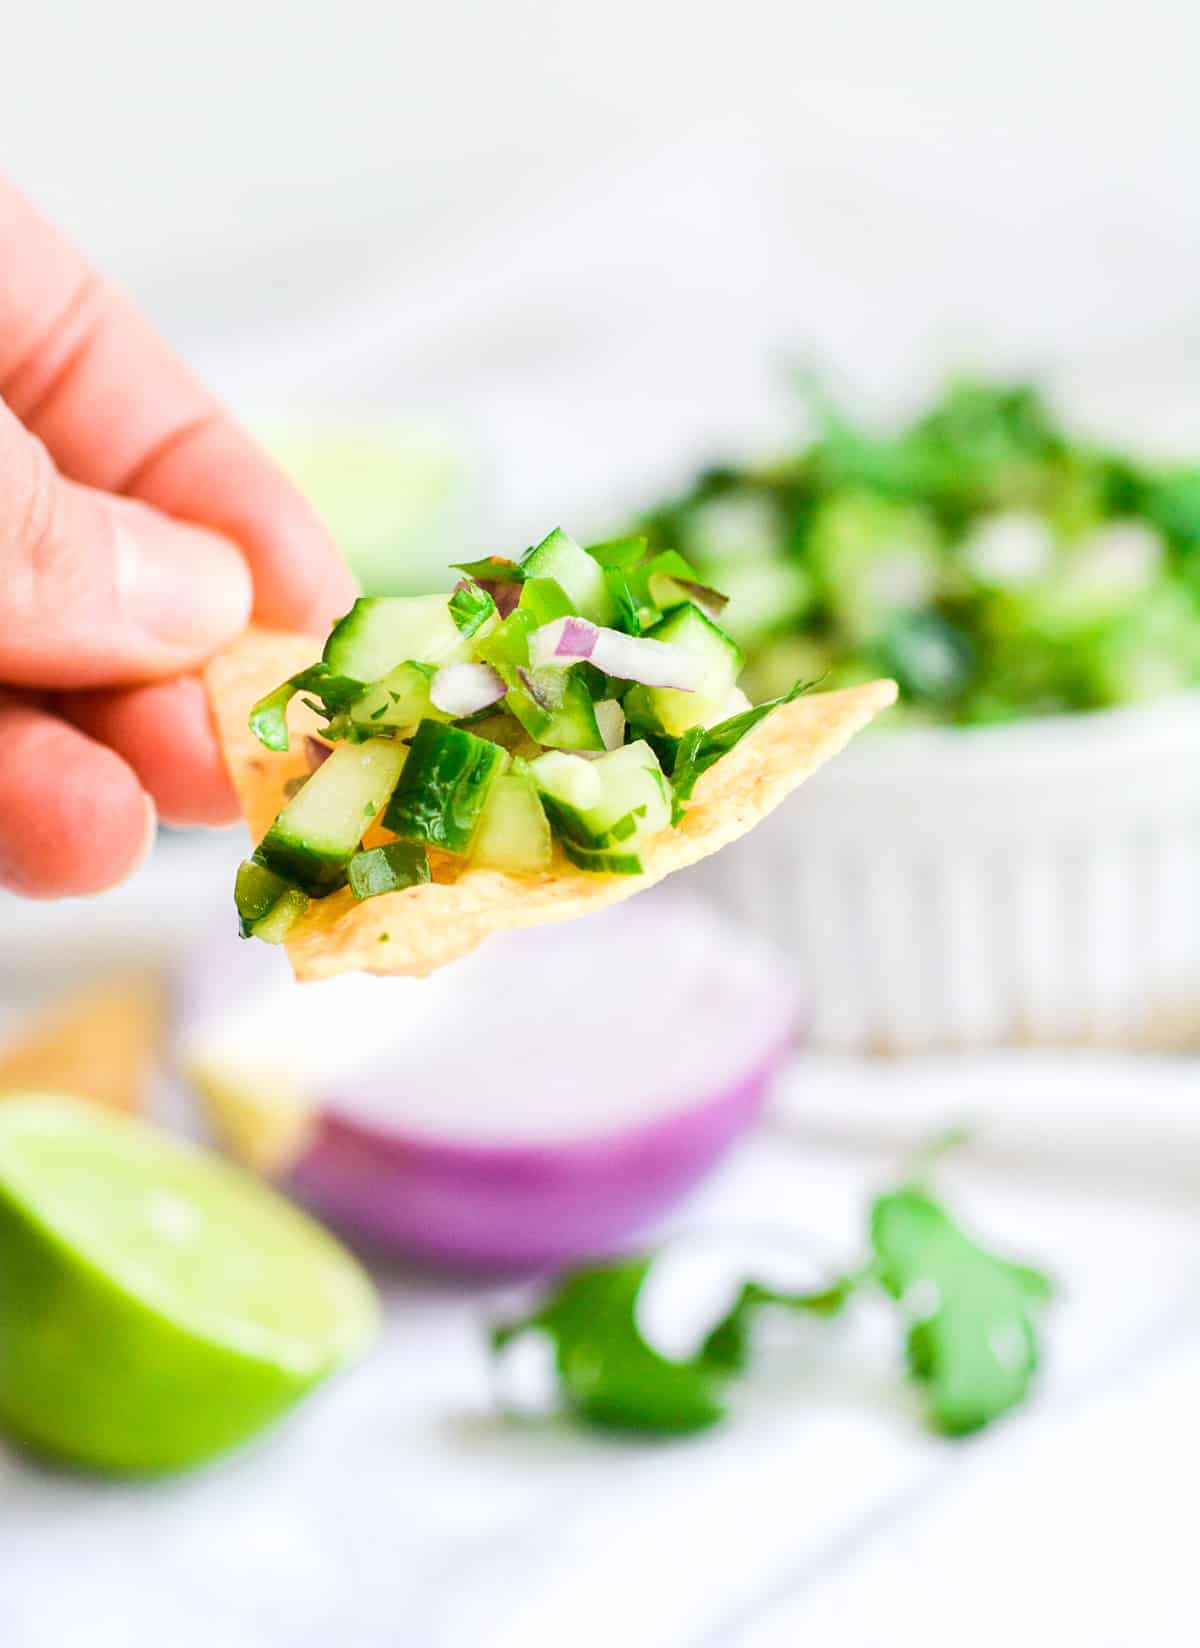 Hand holding a chip with cucumber pico de gallo on it